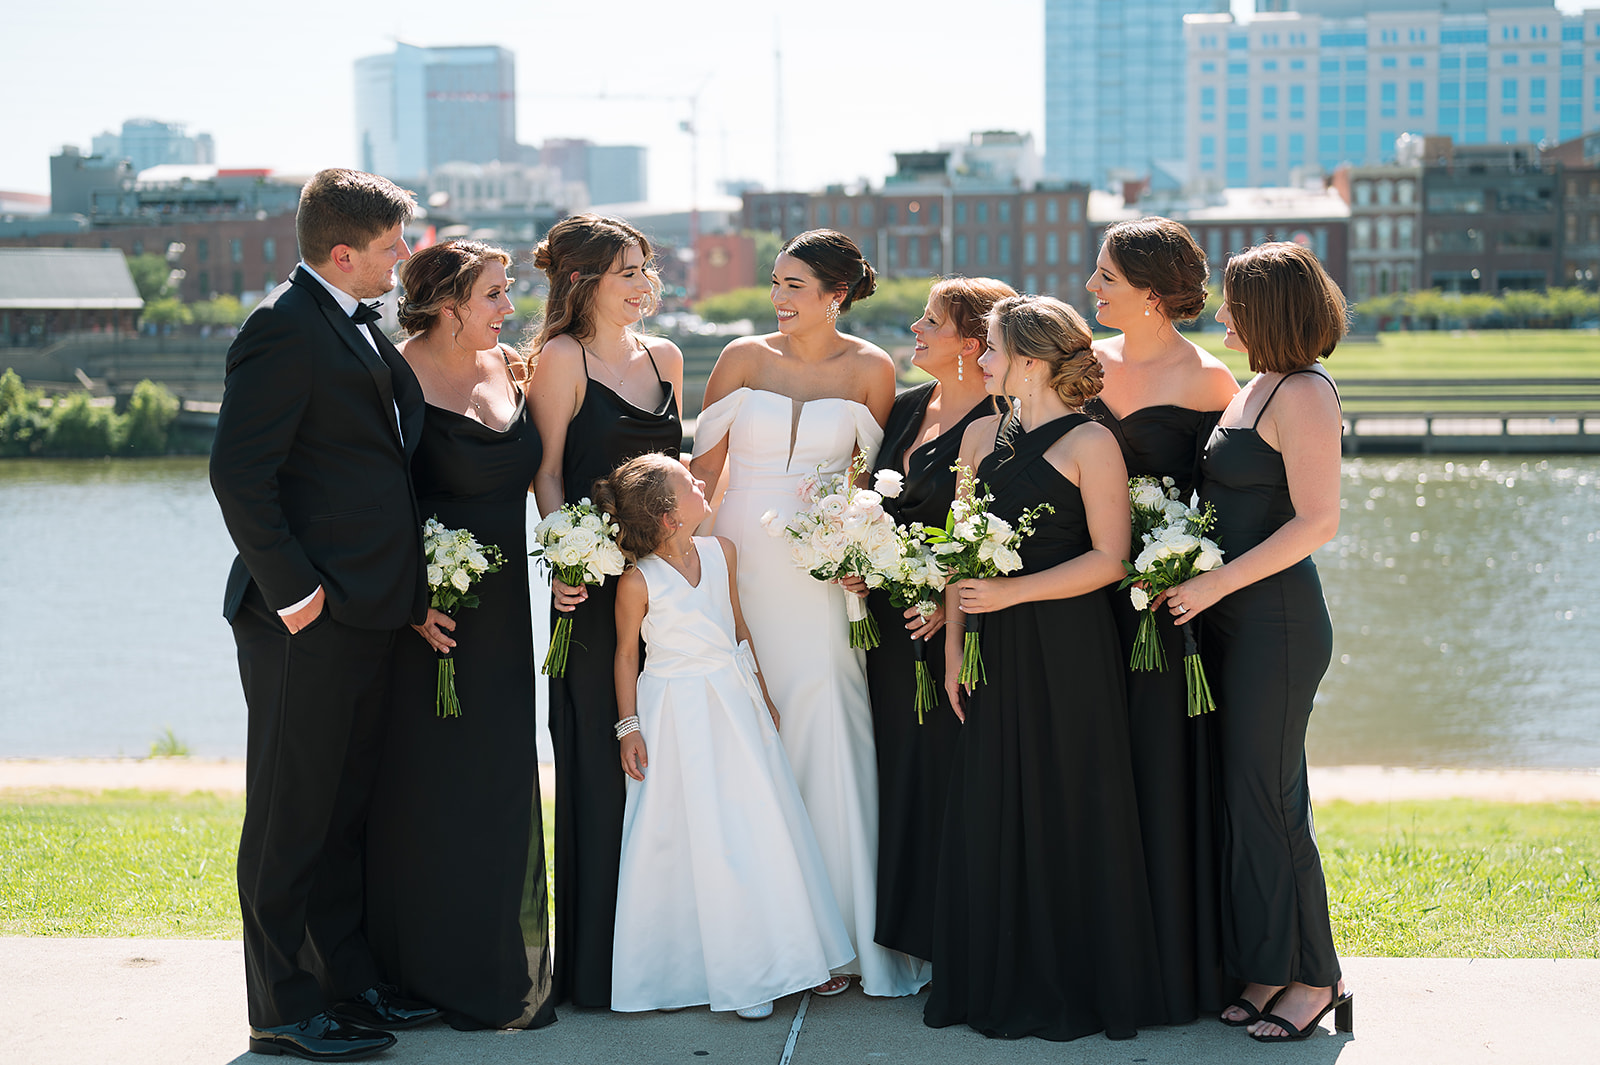 A bride stands with her bridesmaids and flower girl on the edge of a river